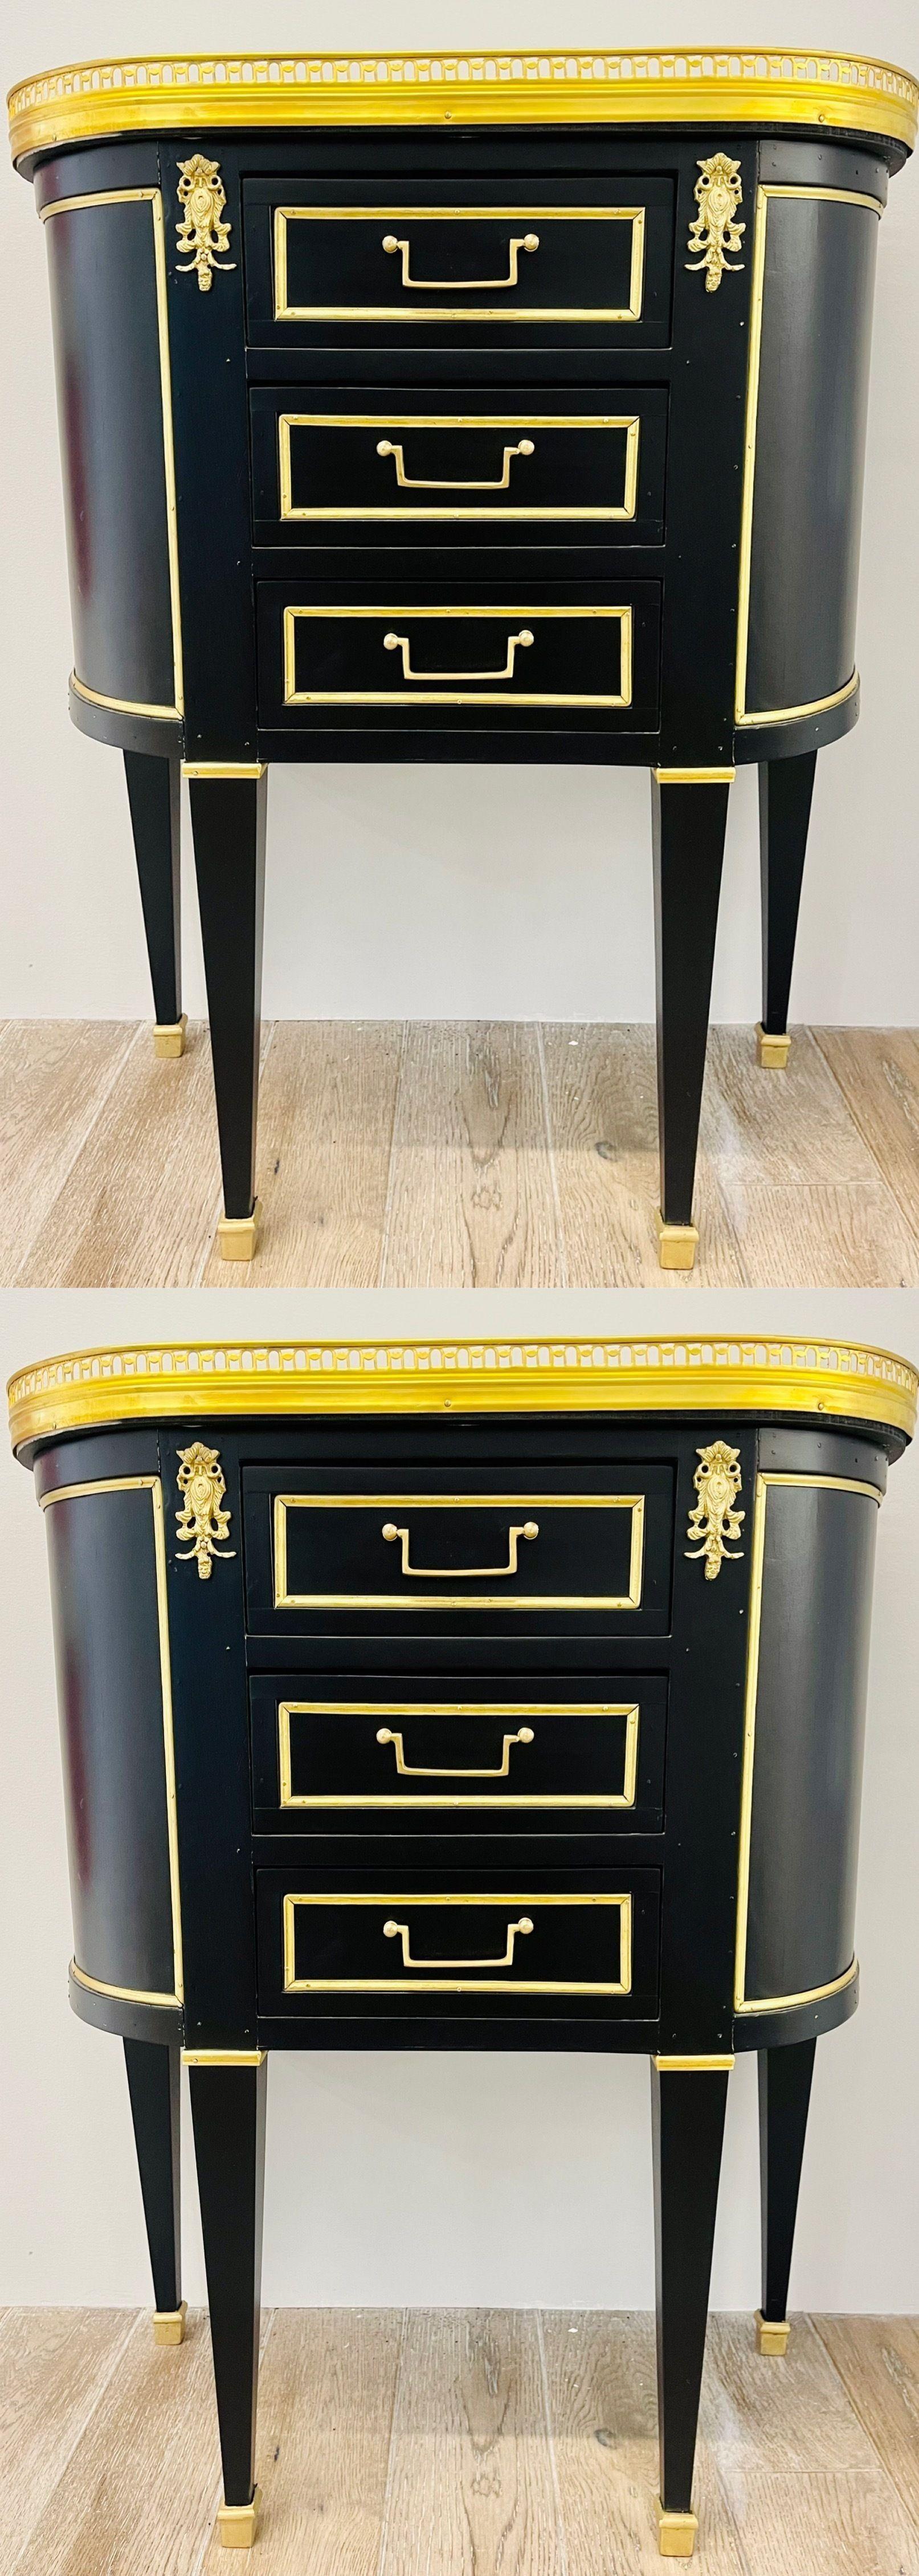 Pair of Jansen Inspired Marble-Top Galleried Ebonized End Tables / Nightstands In Good Condition For Sale In Stamford, CT